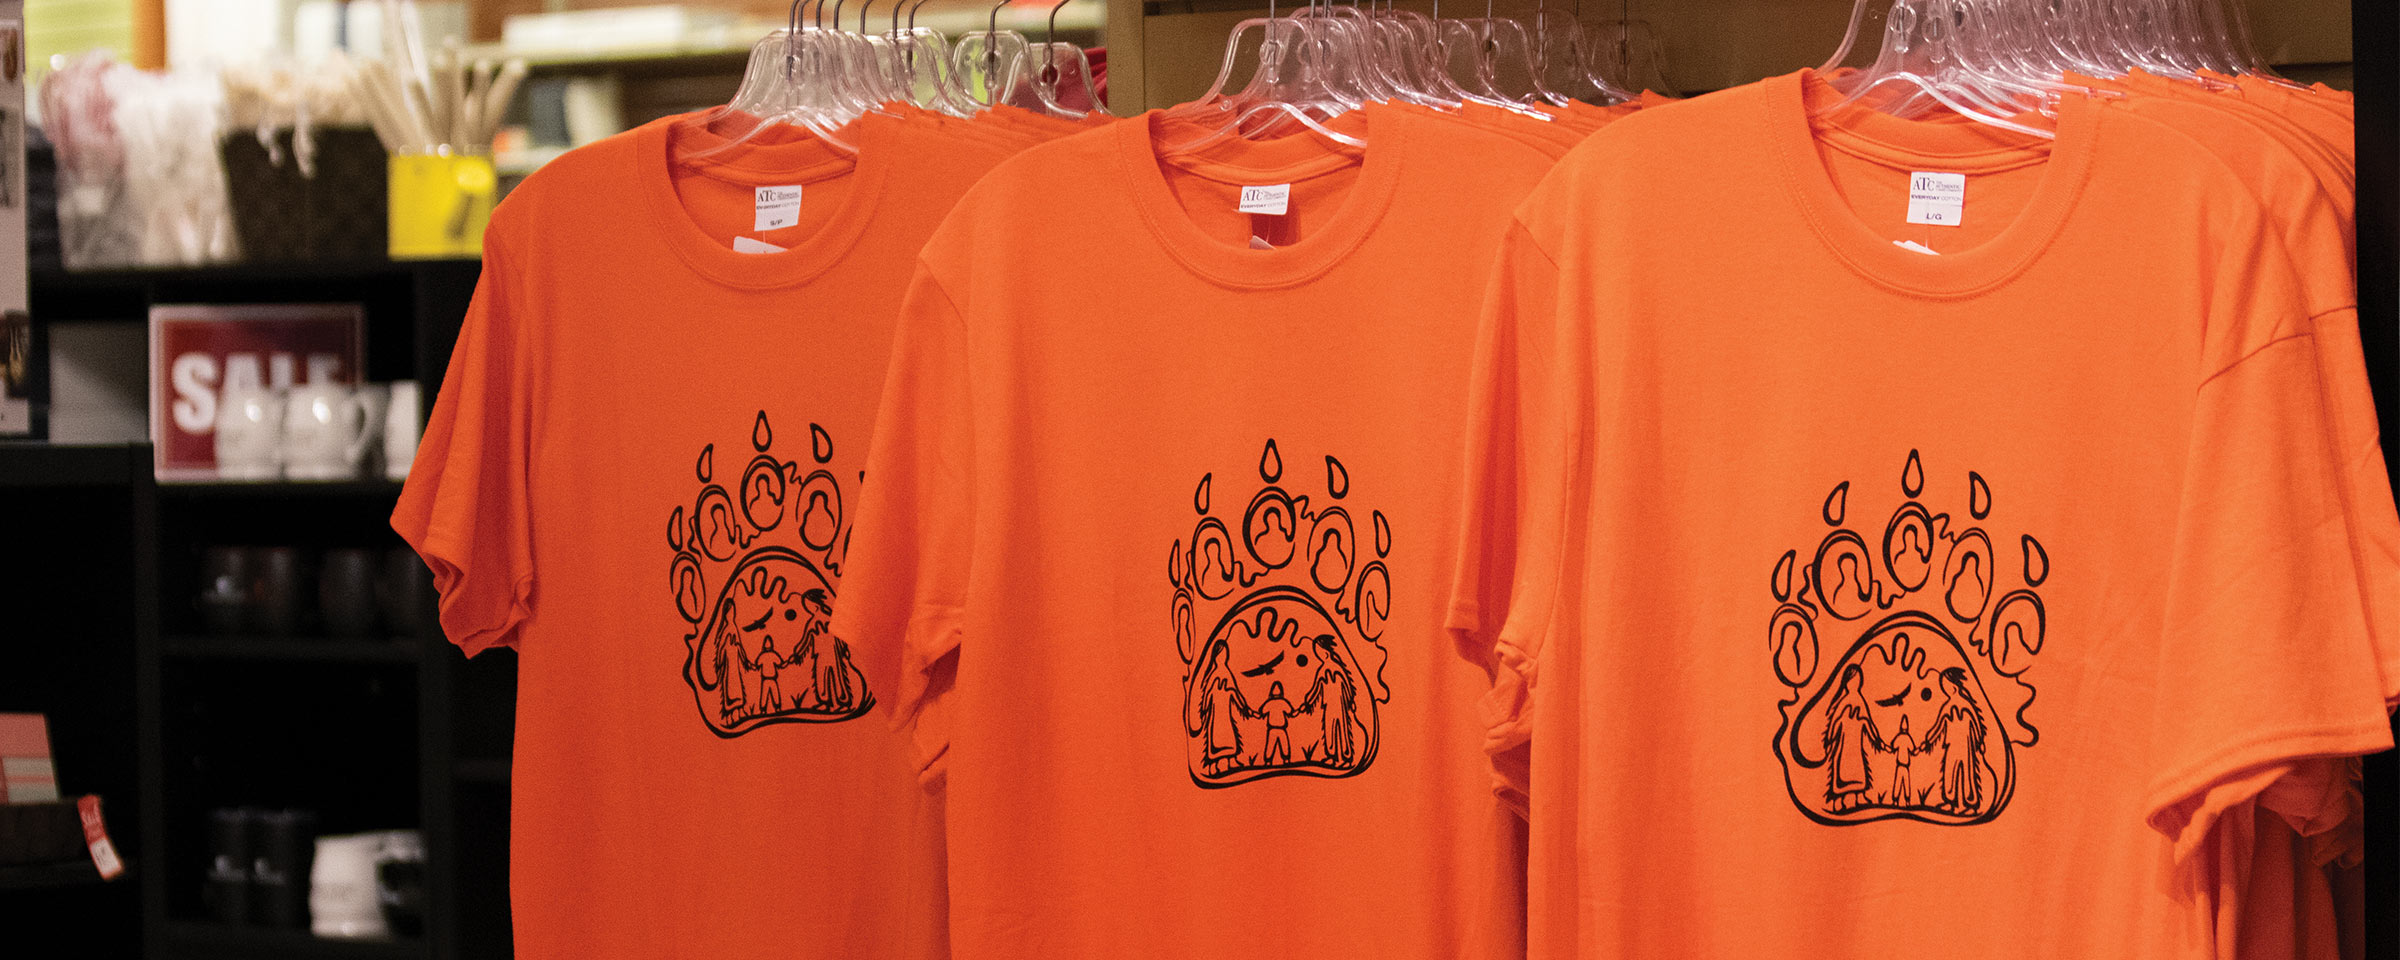 Three orange t-shirts on hangers in RRC Polytech's Campus Store